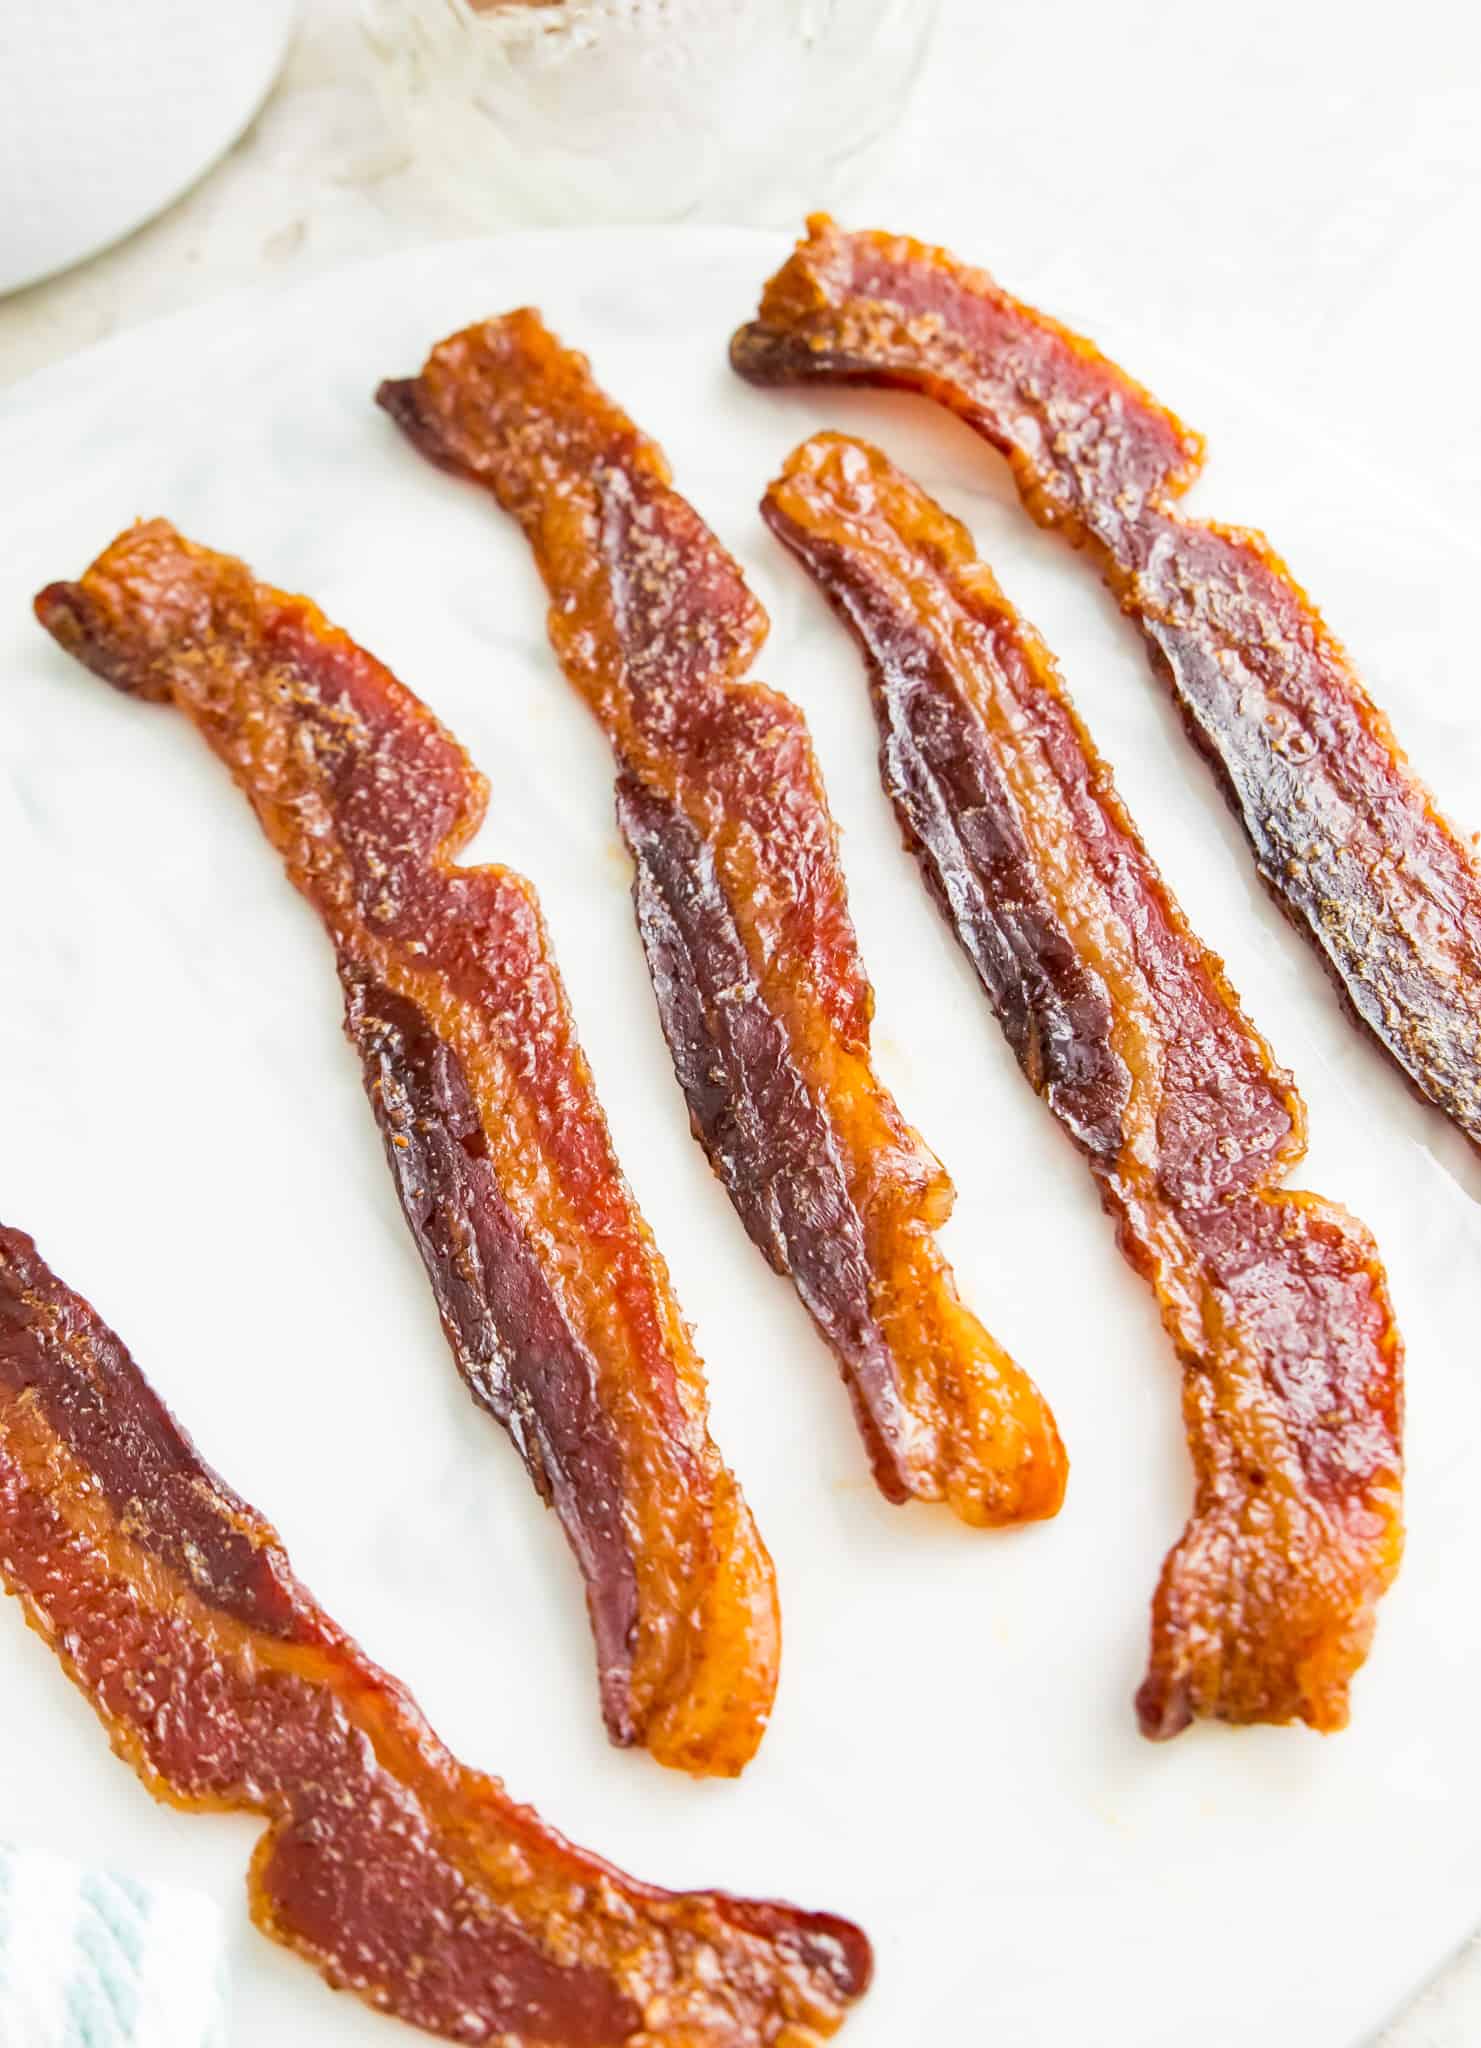 A plate of candied bacon